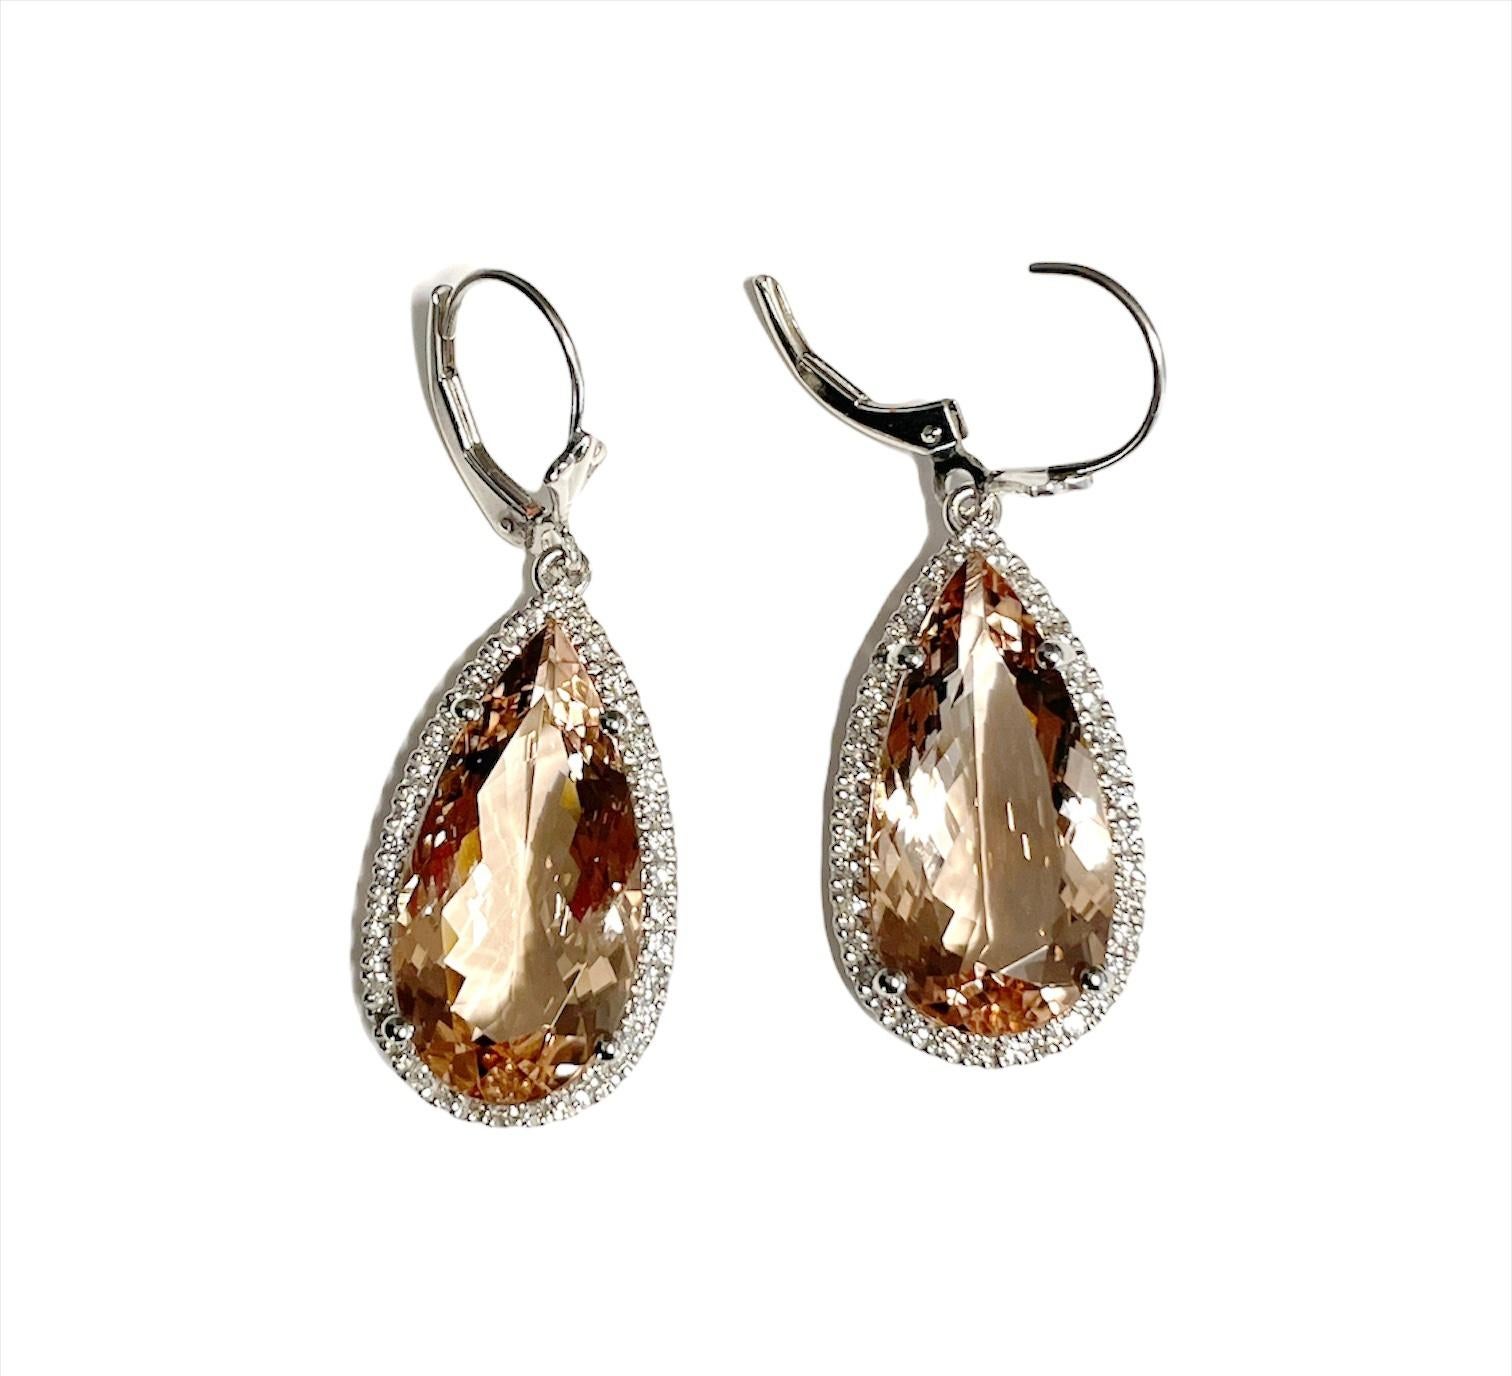 These gorgeous morganite diamond earrings feature 2 pear shape morganites weighing 15.73ct surrounded by 74 diamonds weighing approx. .55ct set in 14k white gold.